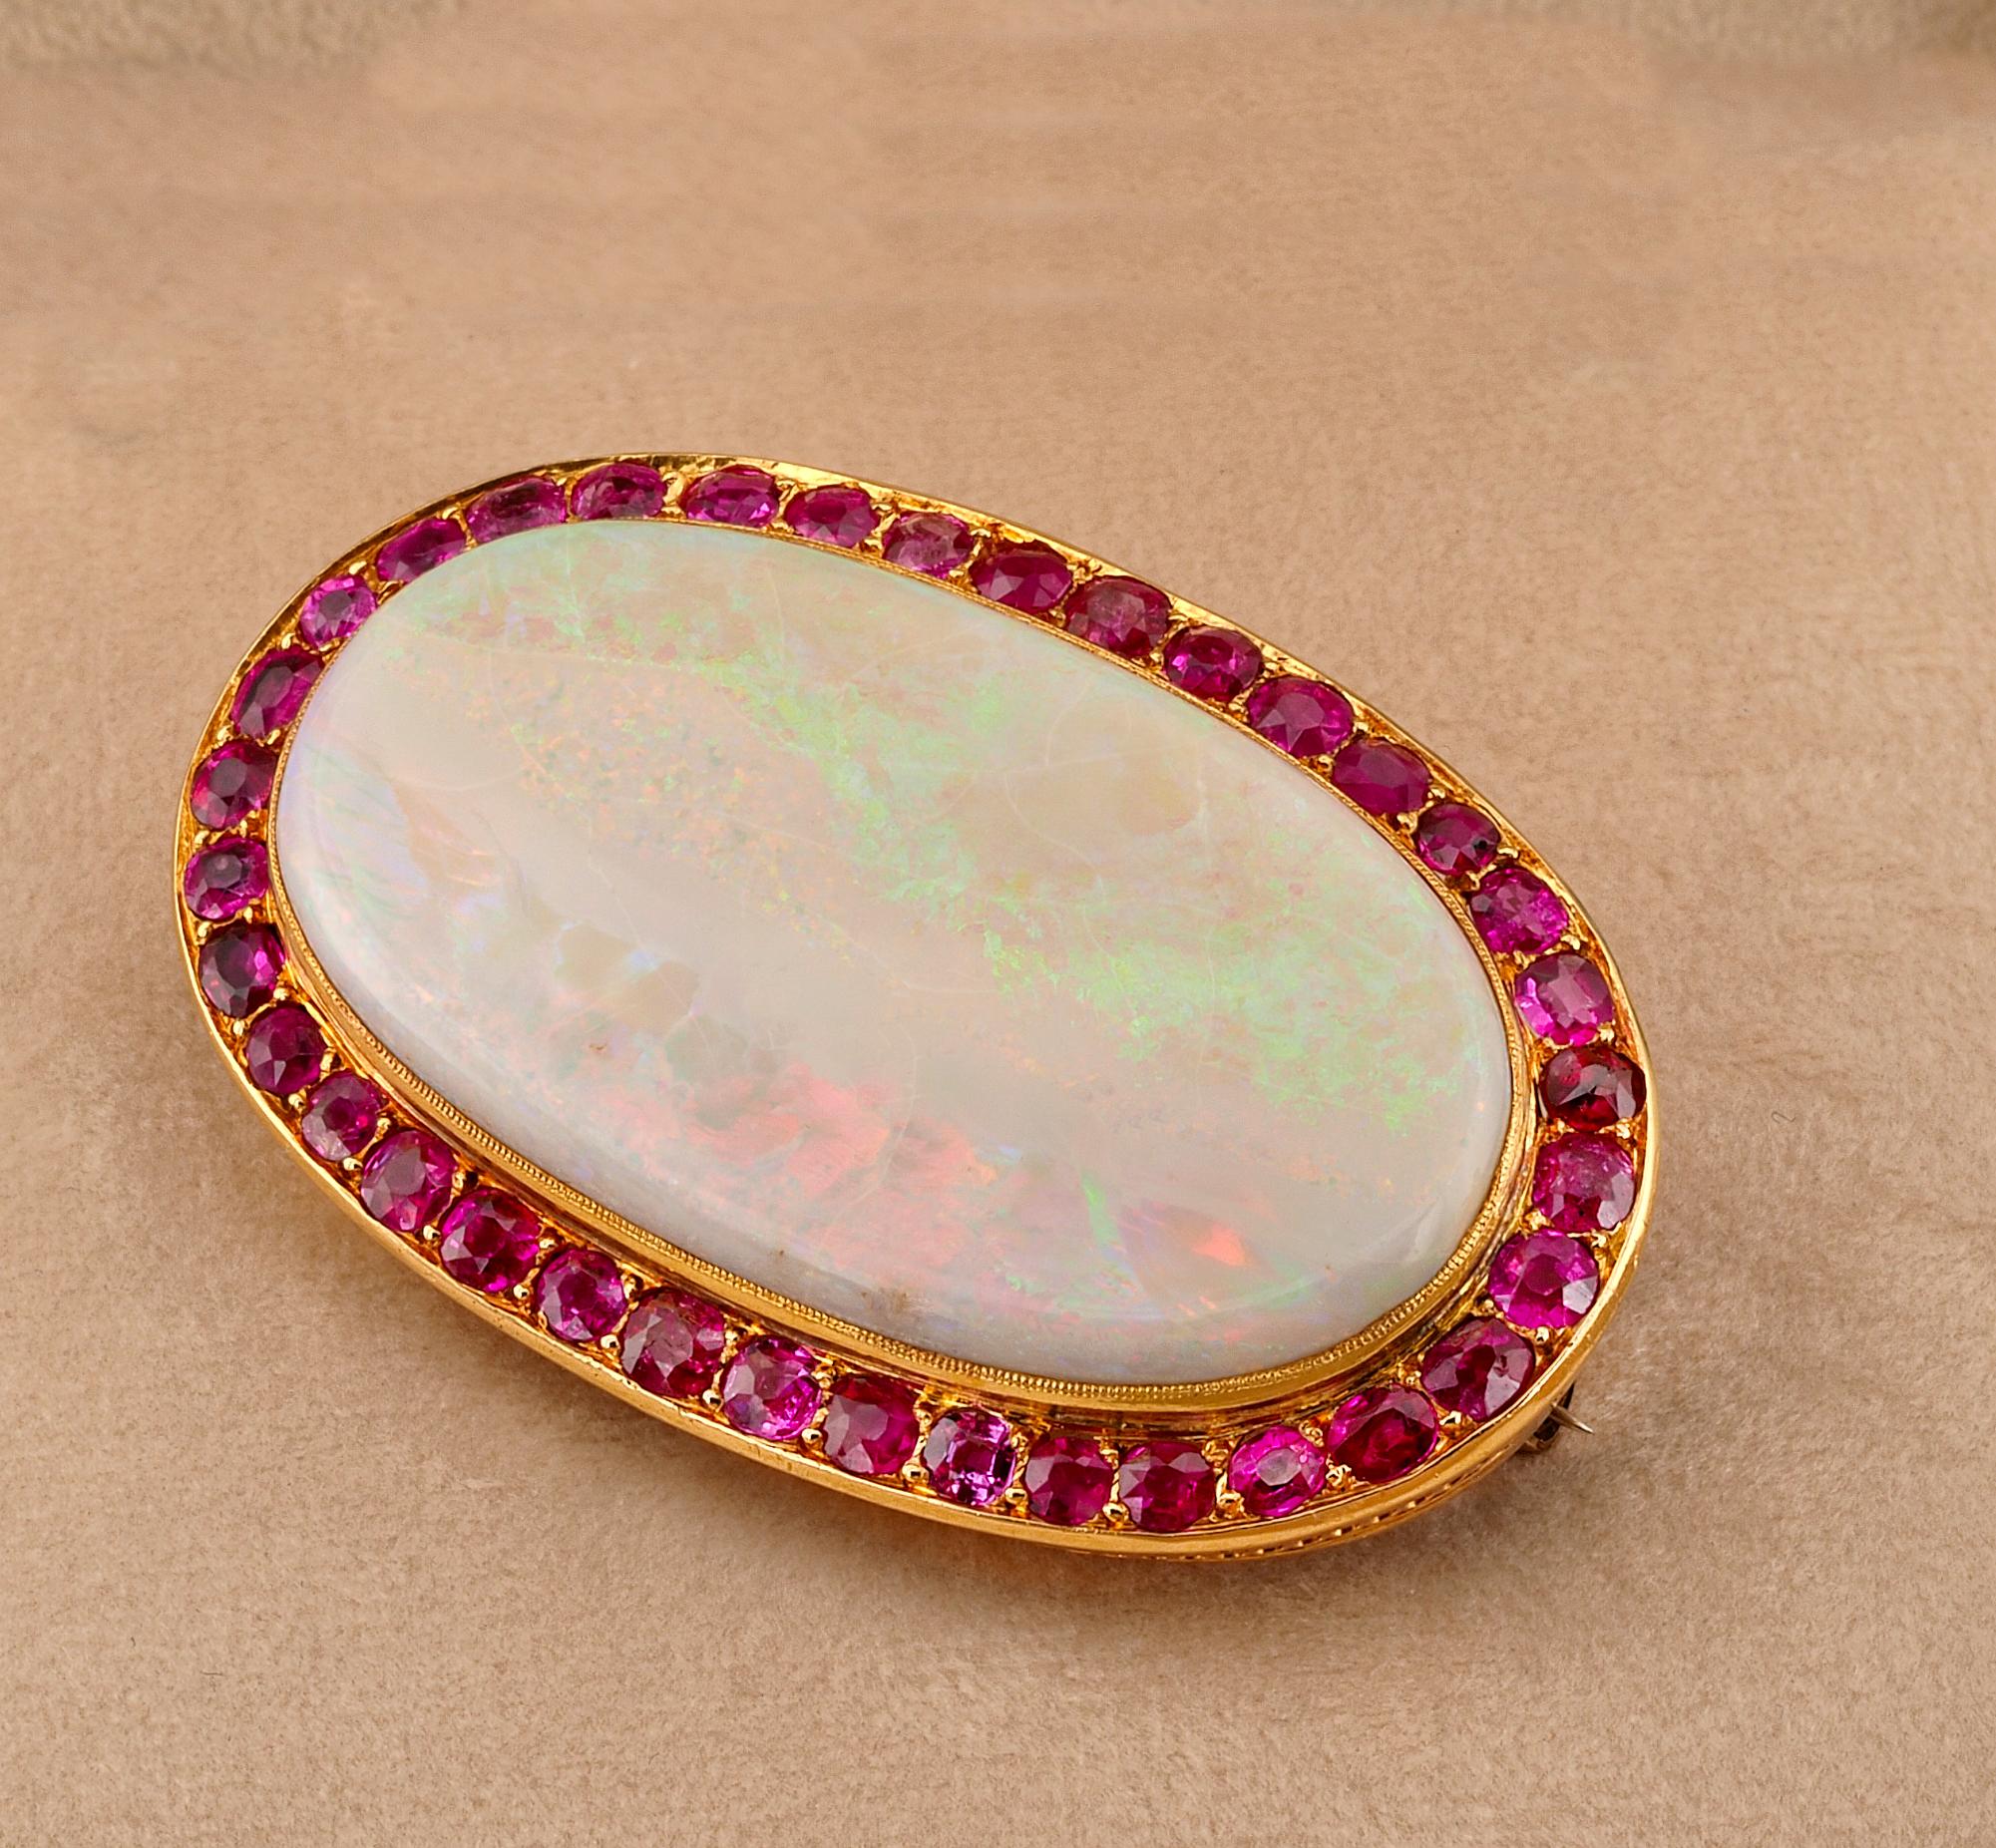 Women's French Victorian 39.00 Ct Australian Opal 6.00 Ct Rubies Large Brooch For Sale